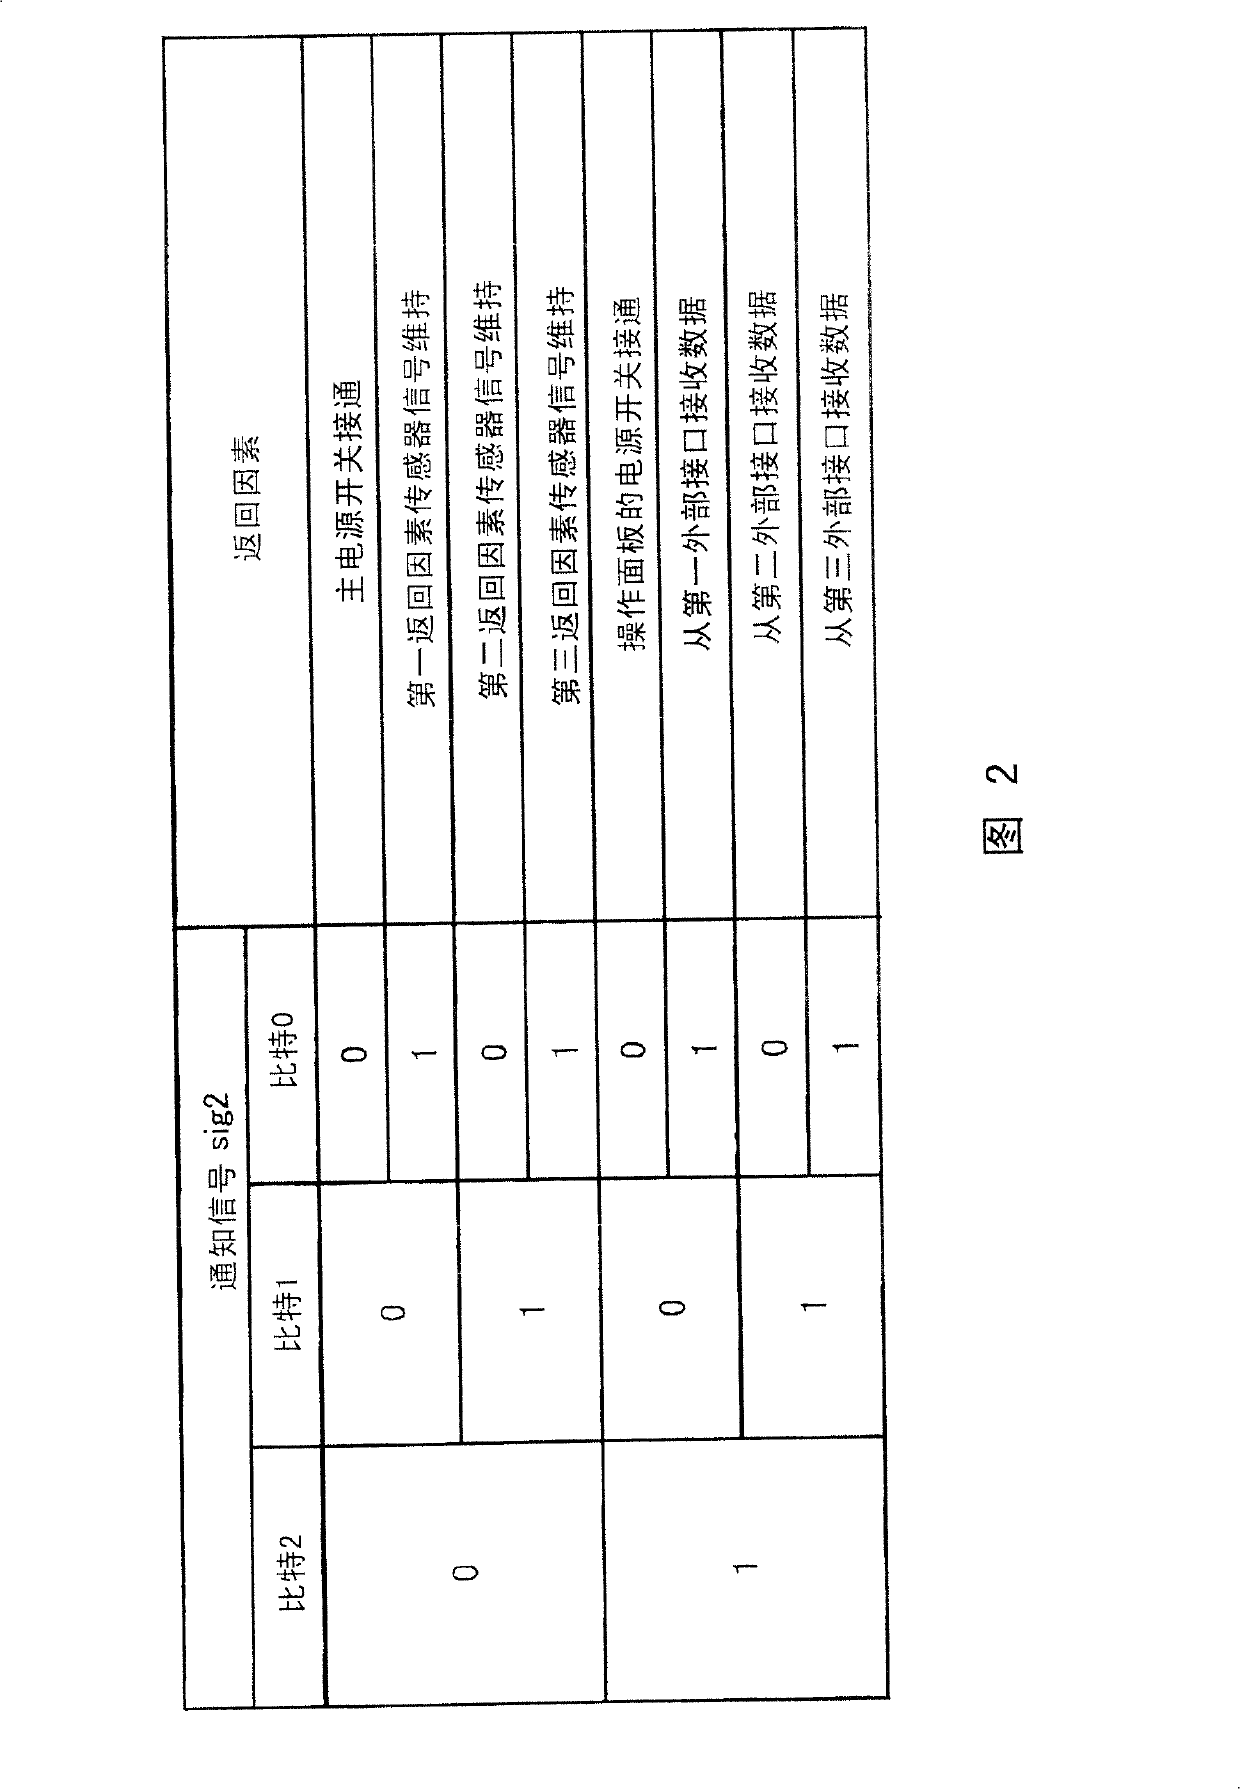 Image forming device and method for controlling the image forming device